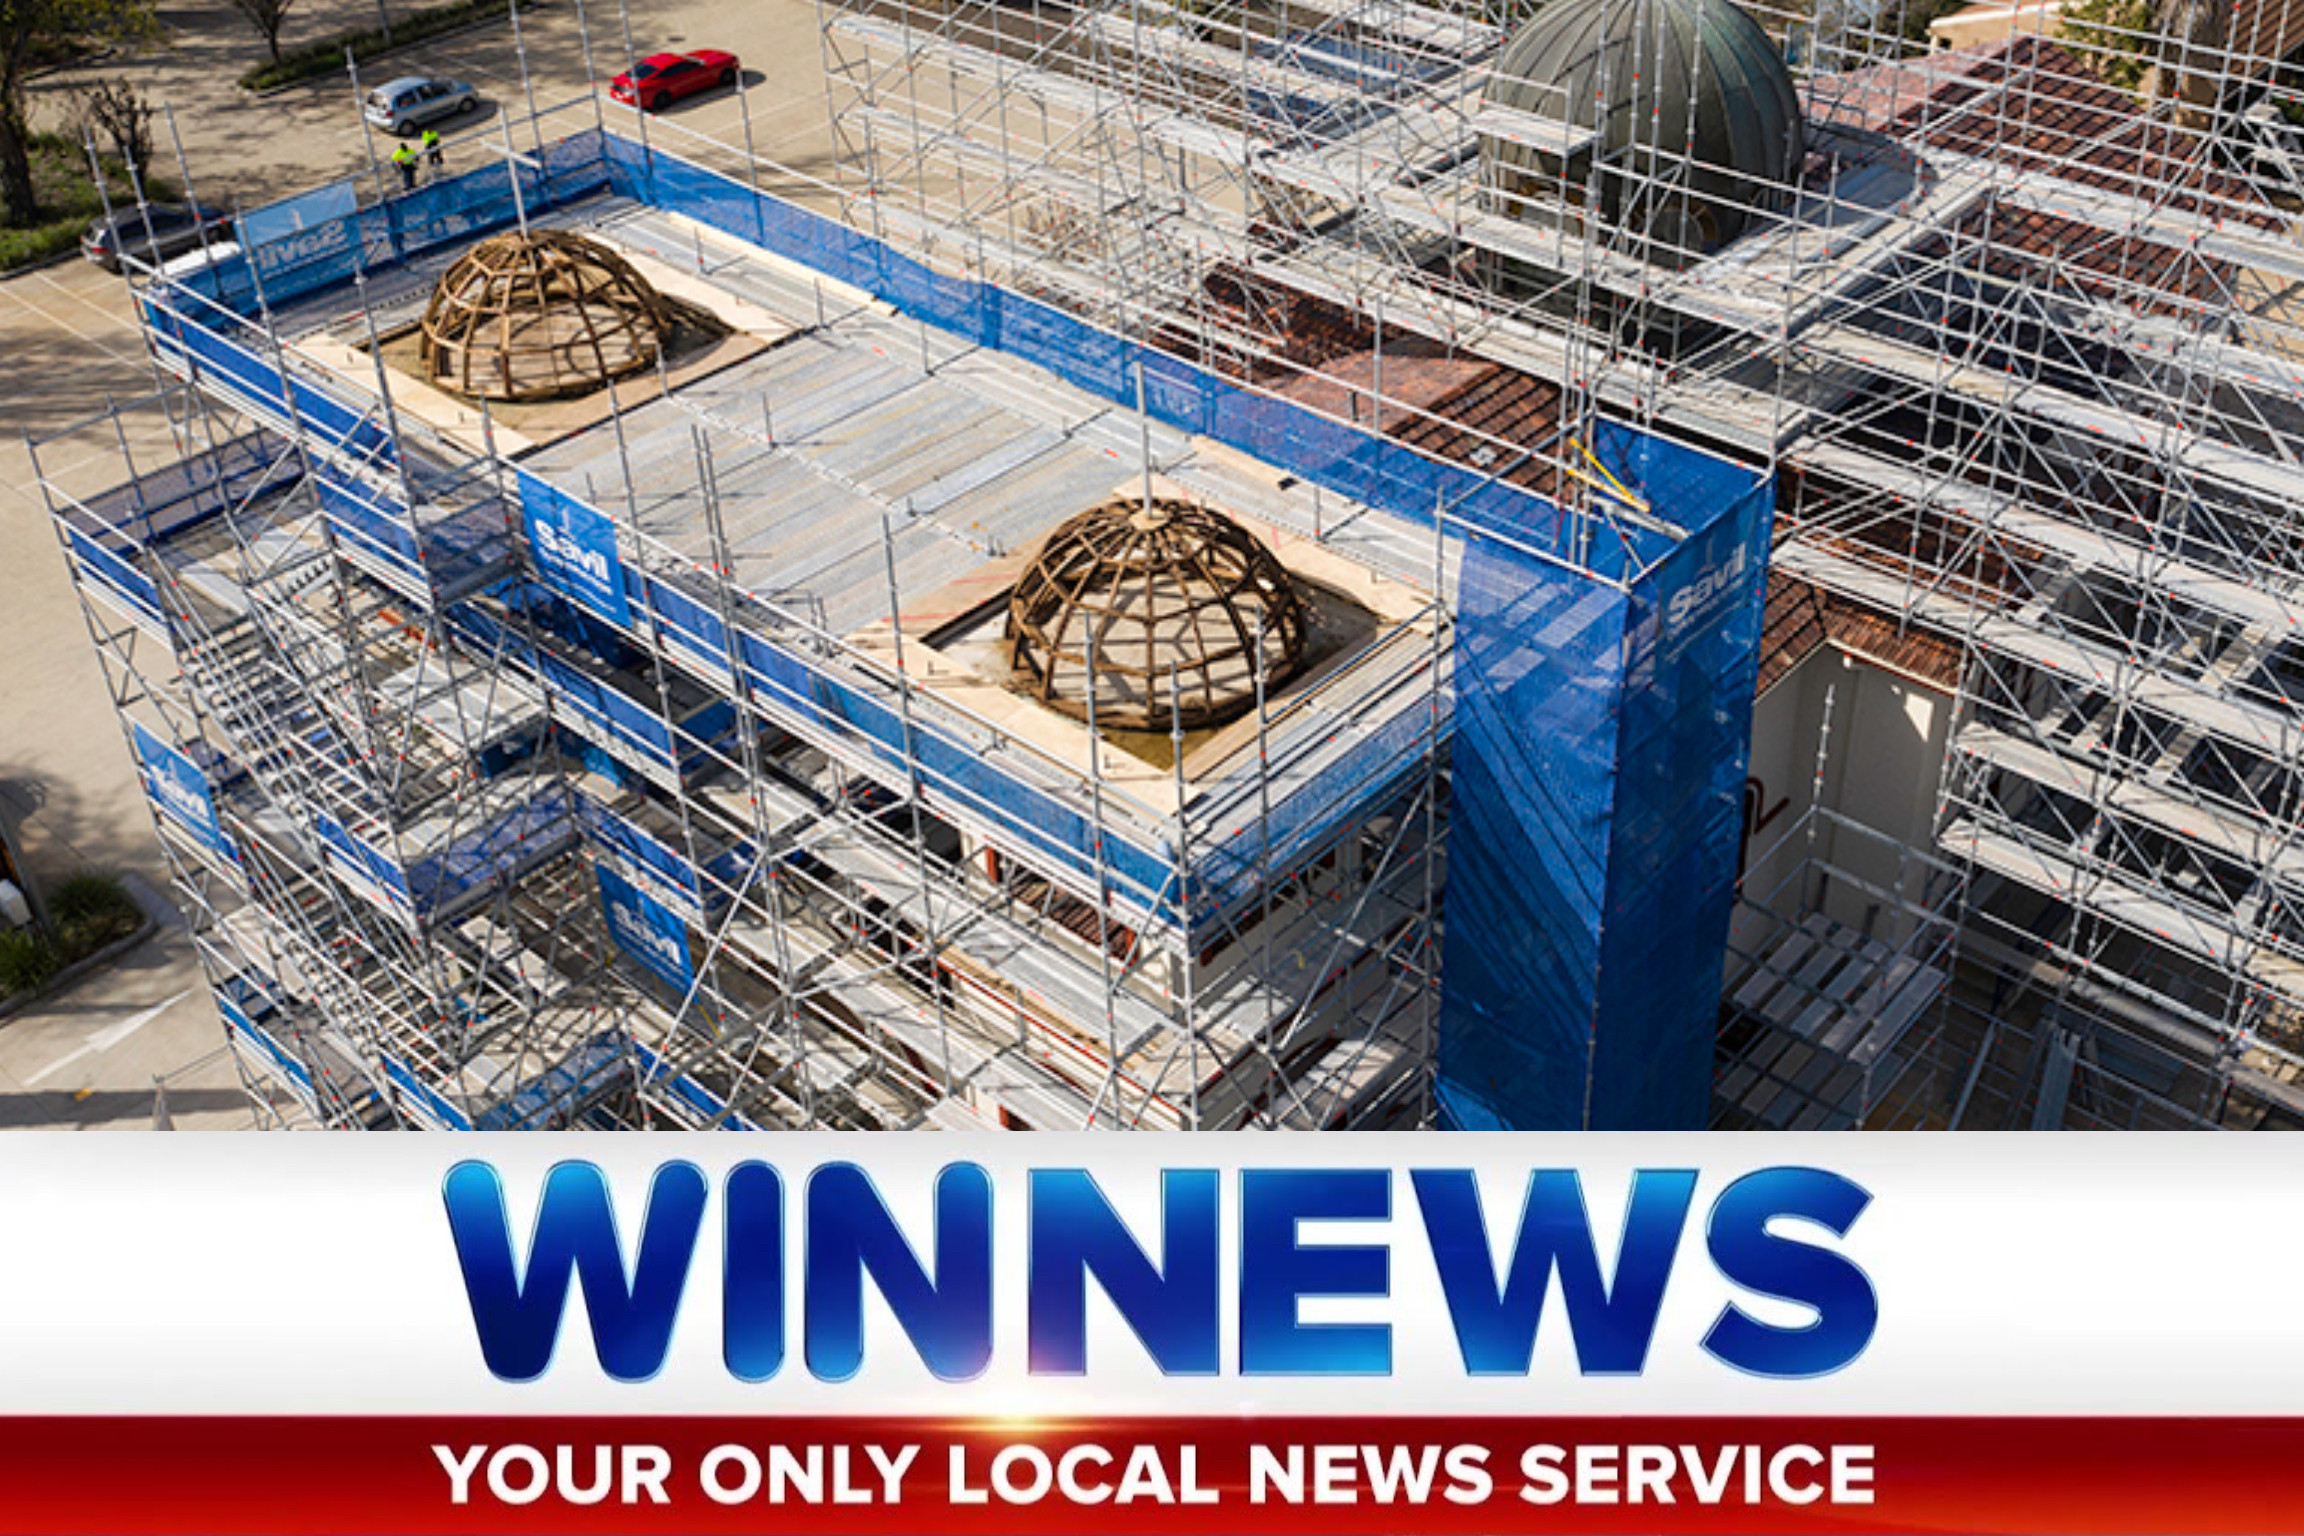 WINNEWS Video Cover about Church Restoration